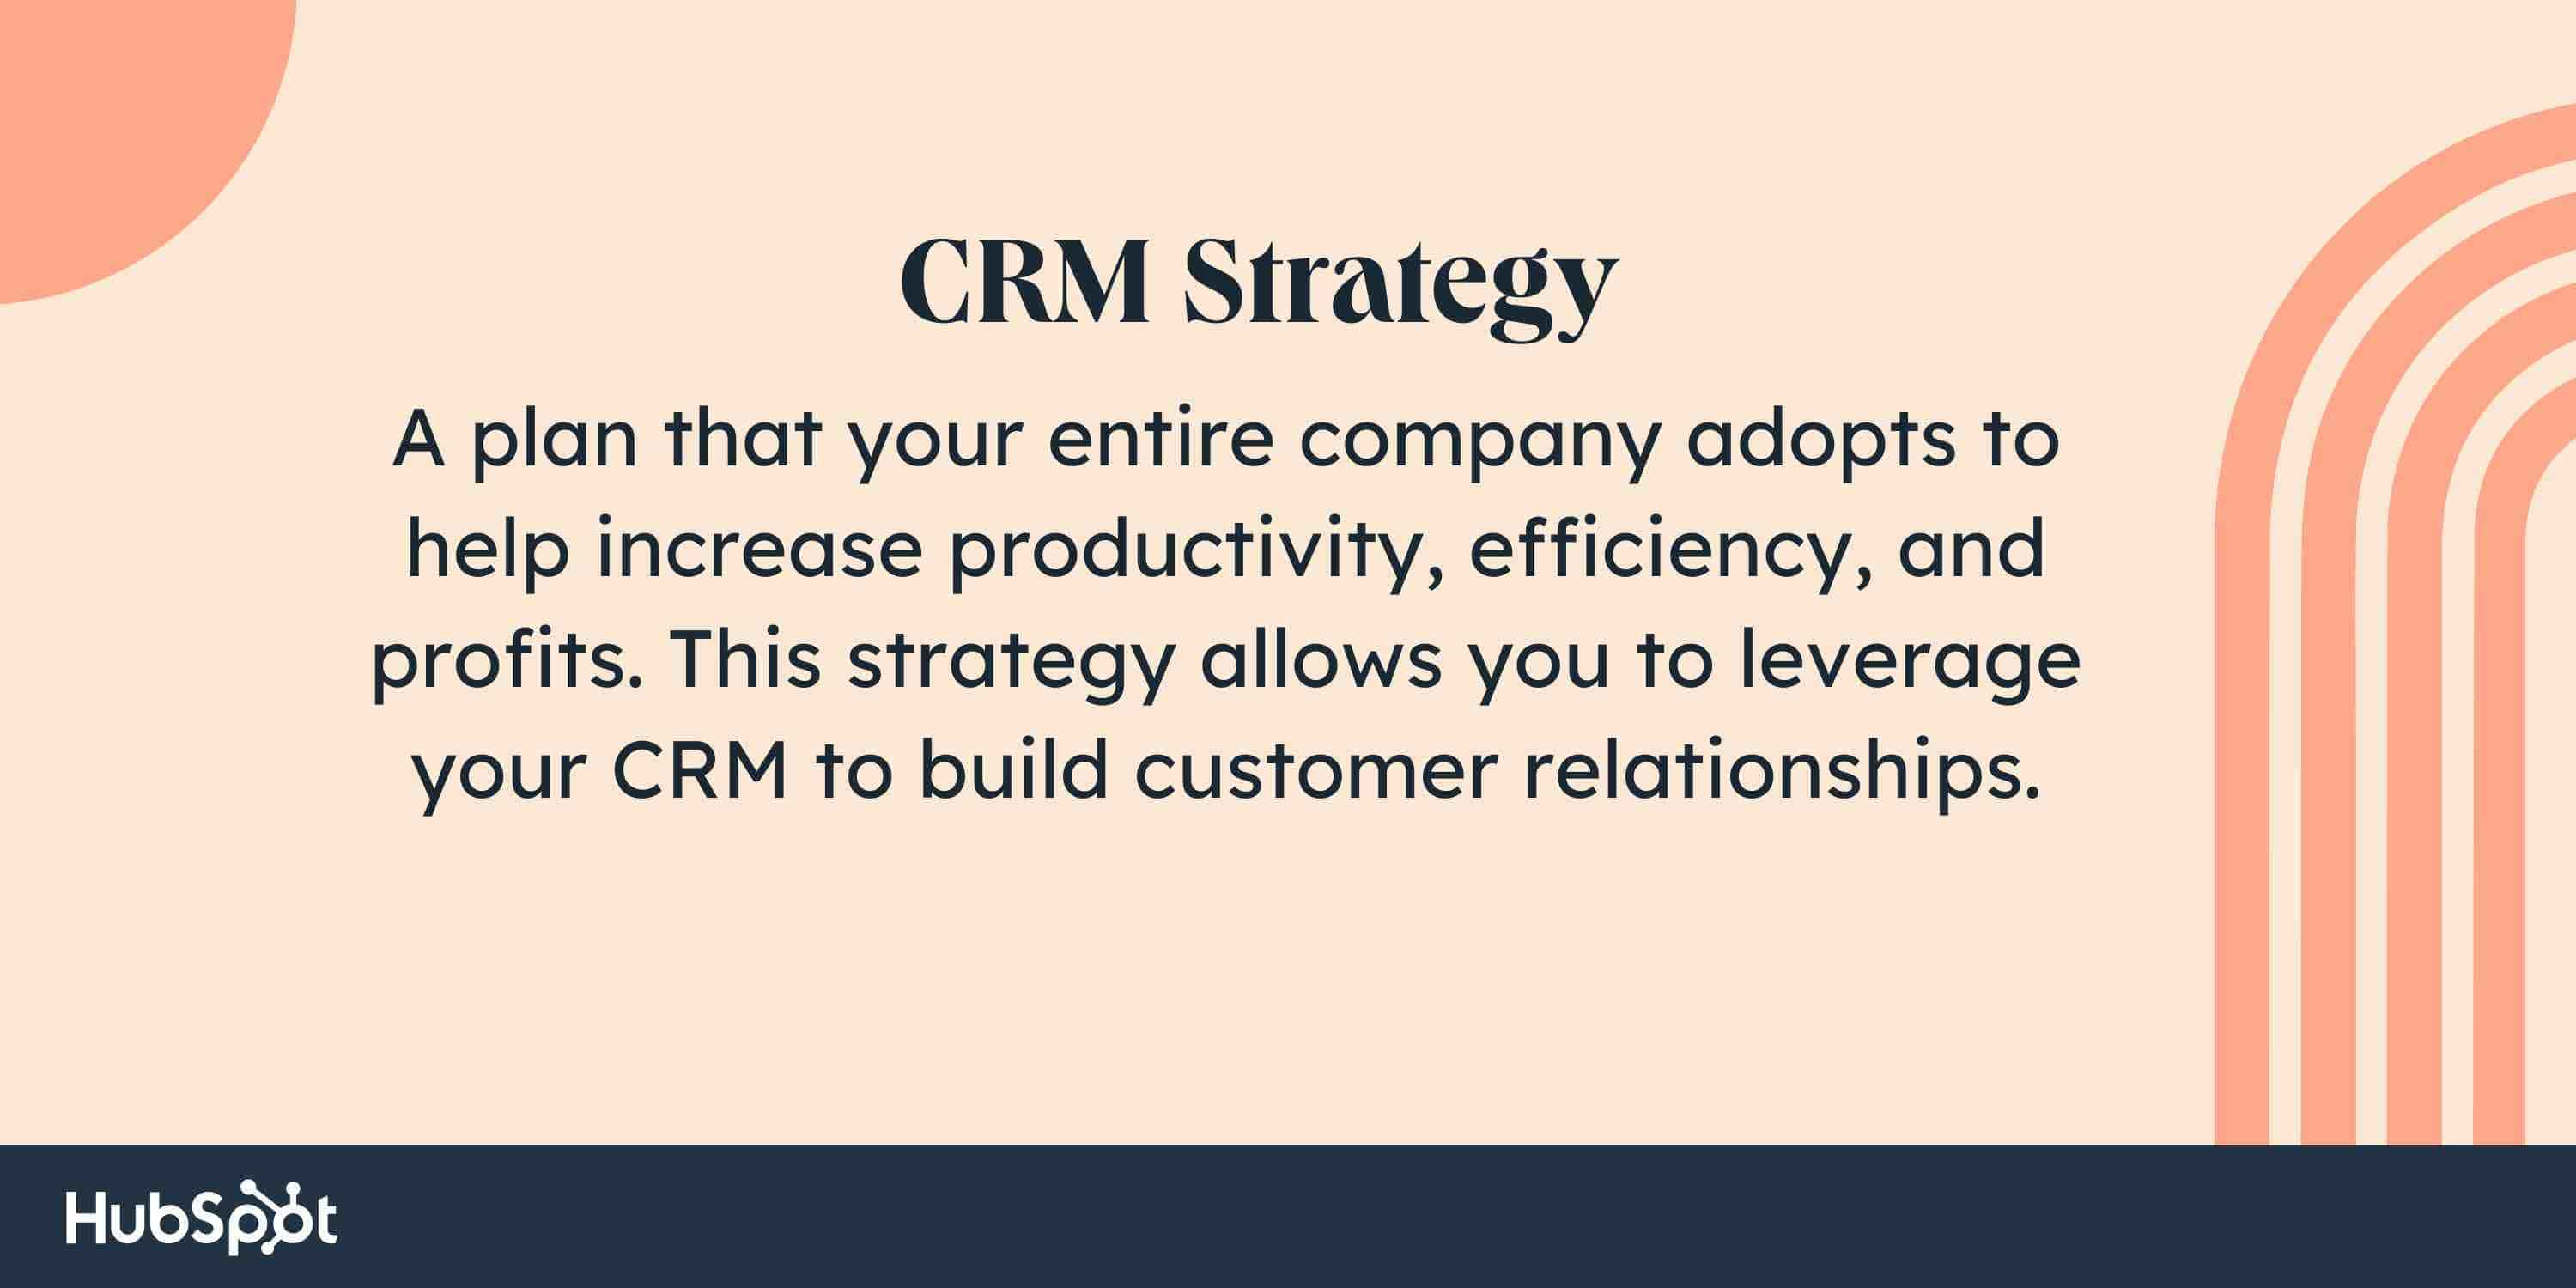 what is crm strategy, A plan that your entire company adopts to help increase productivity, efficiency, and profits. This strategy allows you to leverage your CRM to build customer relationships